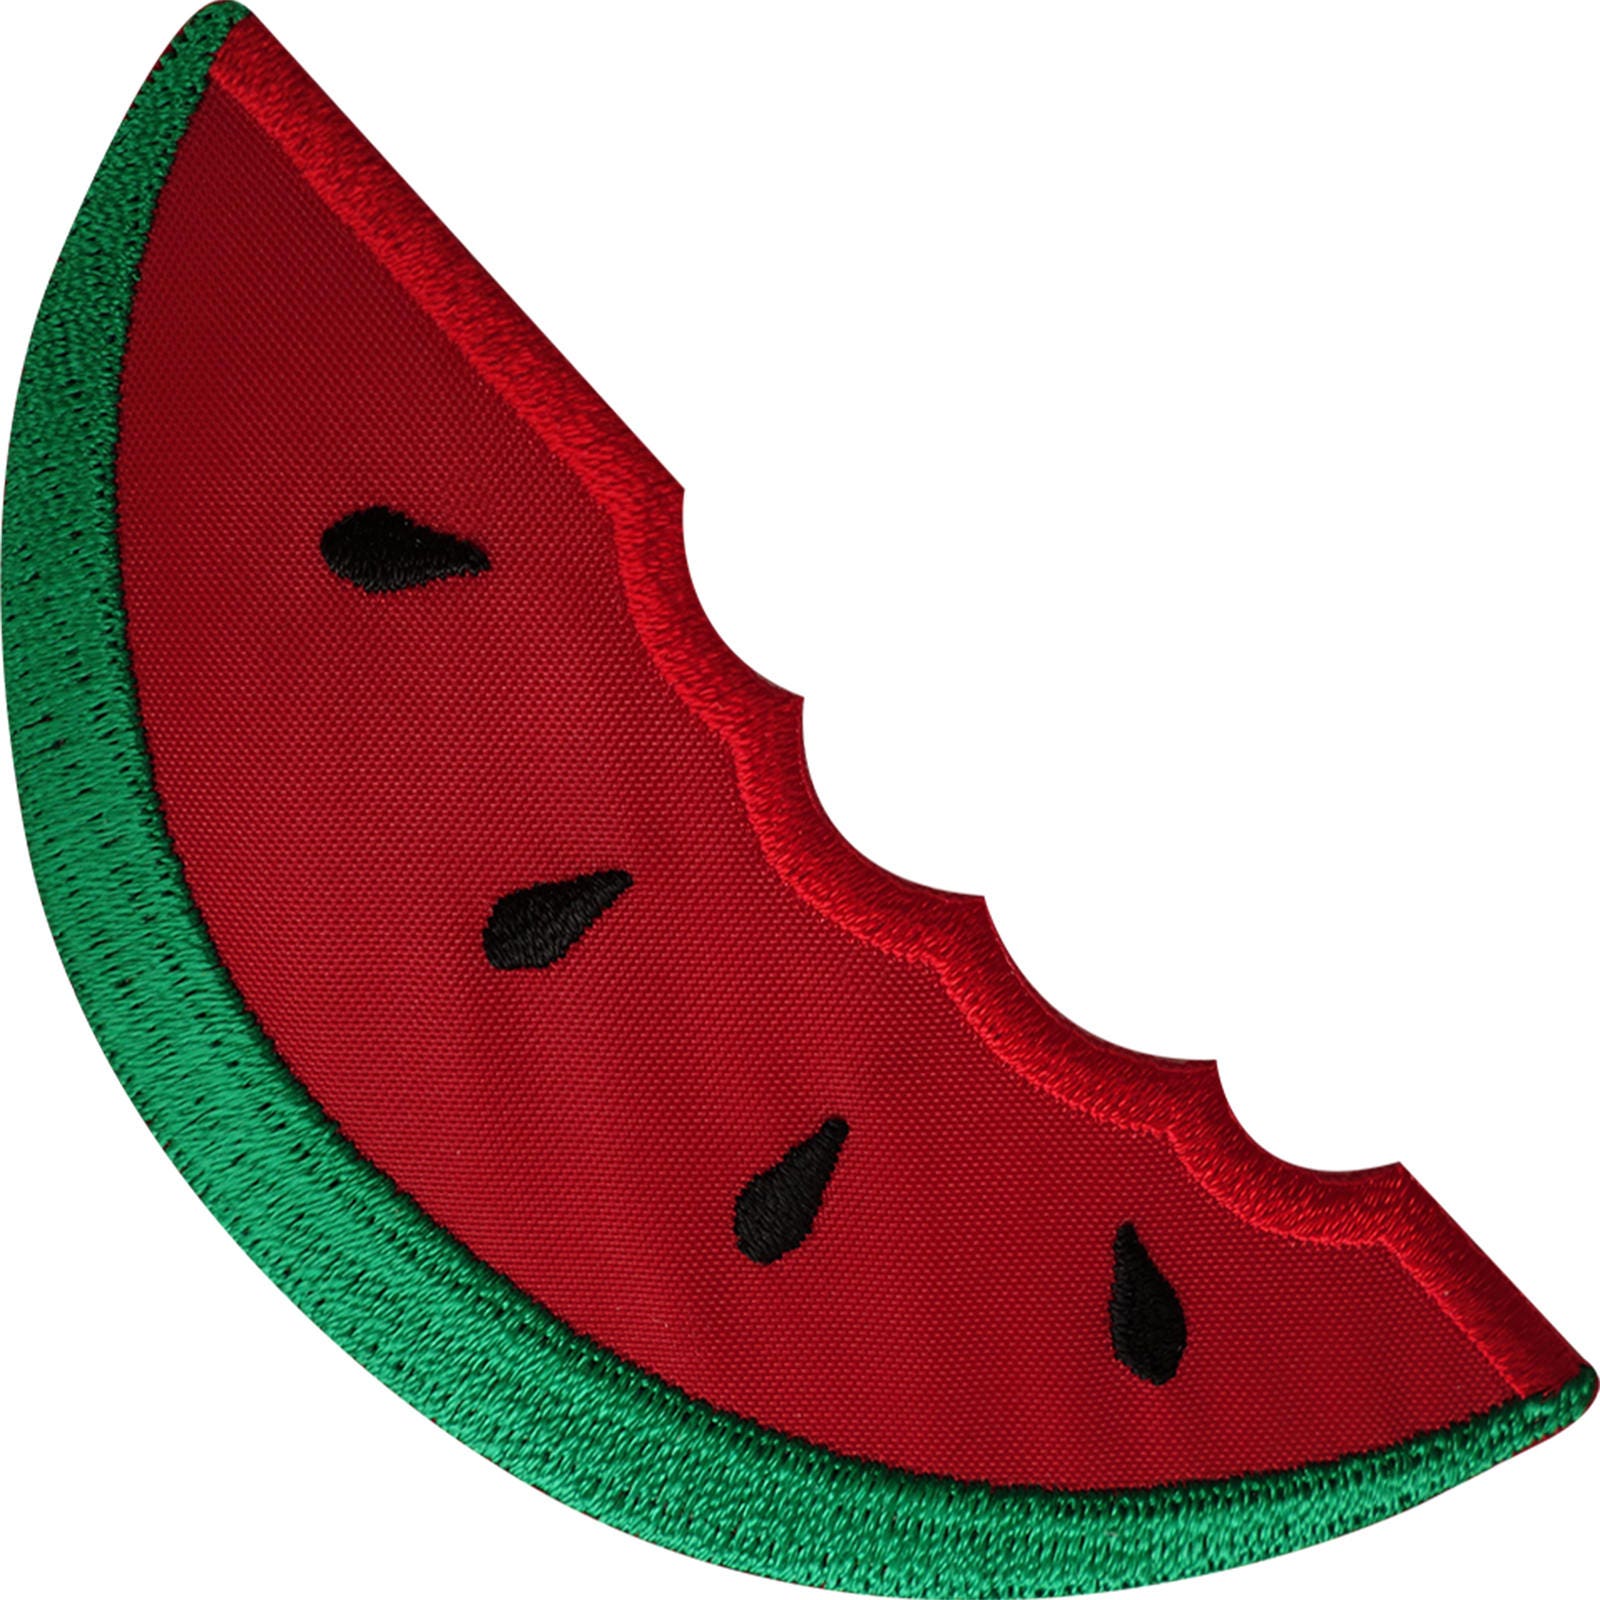 Backpacks Melon Fruits DIY Iron On Embroidered Sew On Applique Watermelon Patch Shirts for Jackets